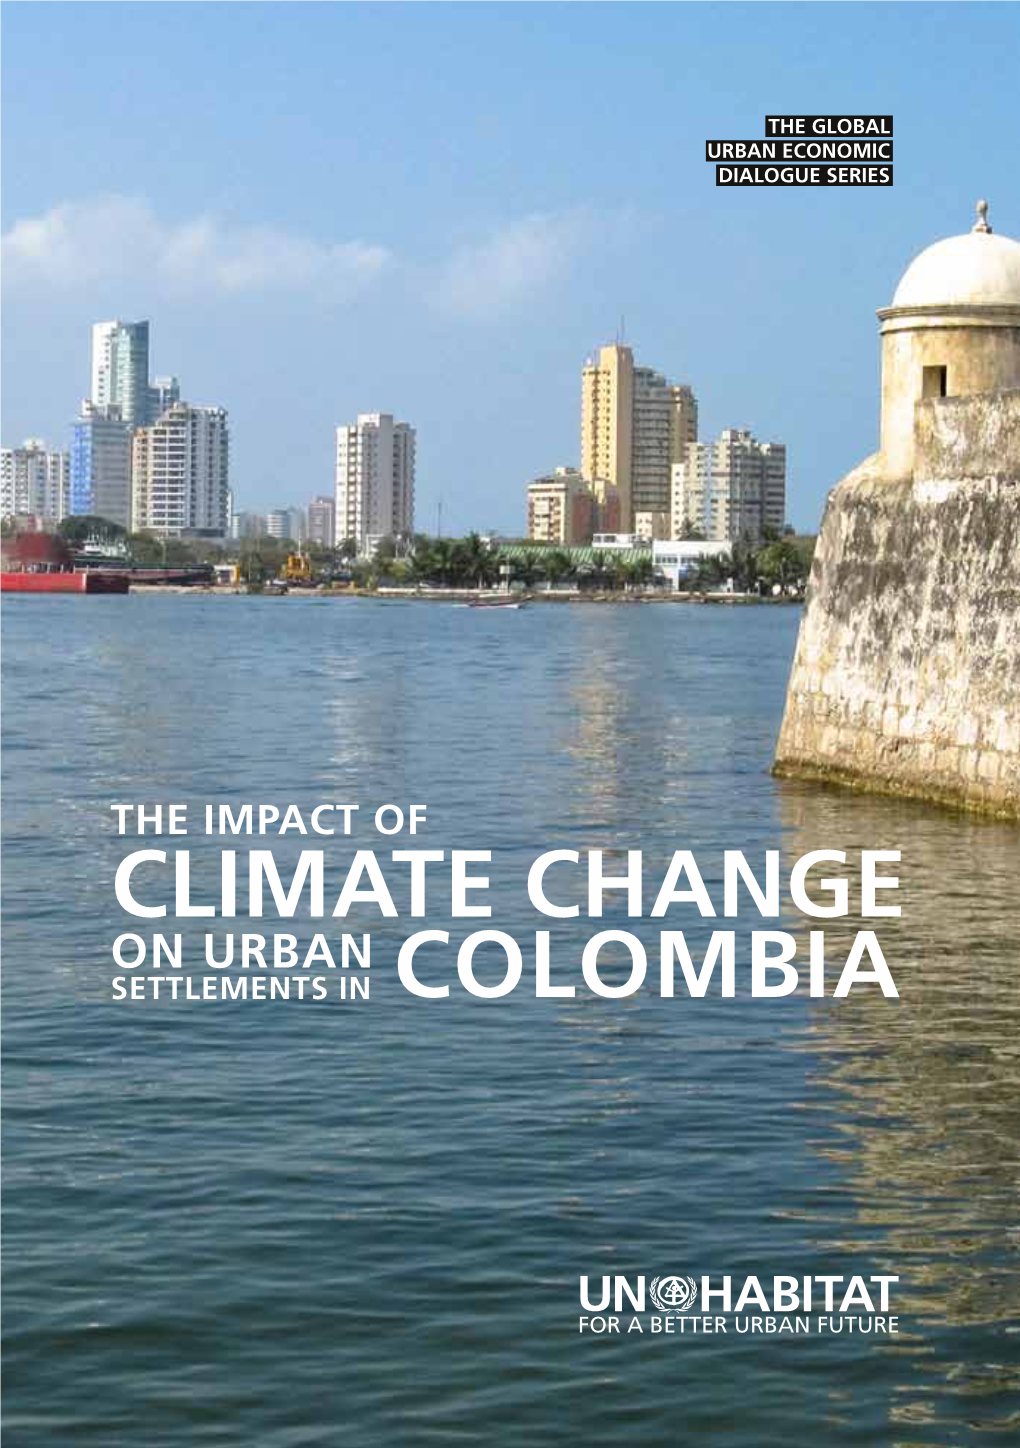 Climate Change on Urban Settlements and Adaptation Strategies and Practices, and Particularly Low-Income Groups’ Adaptation in Colombia